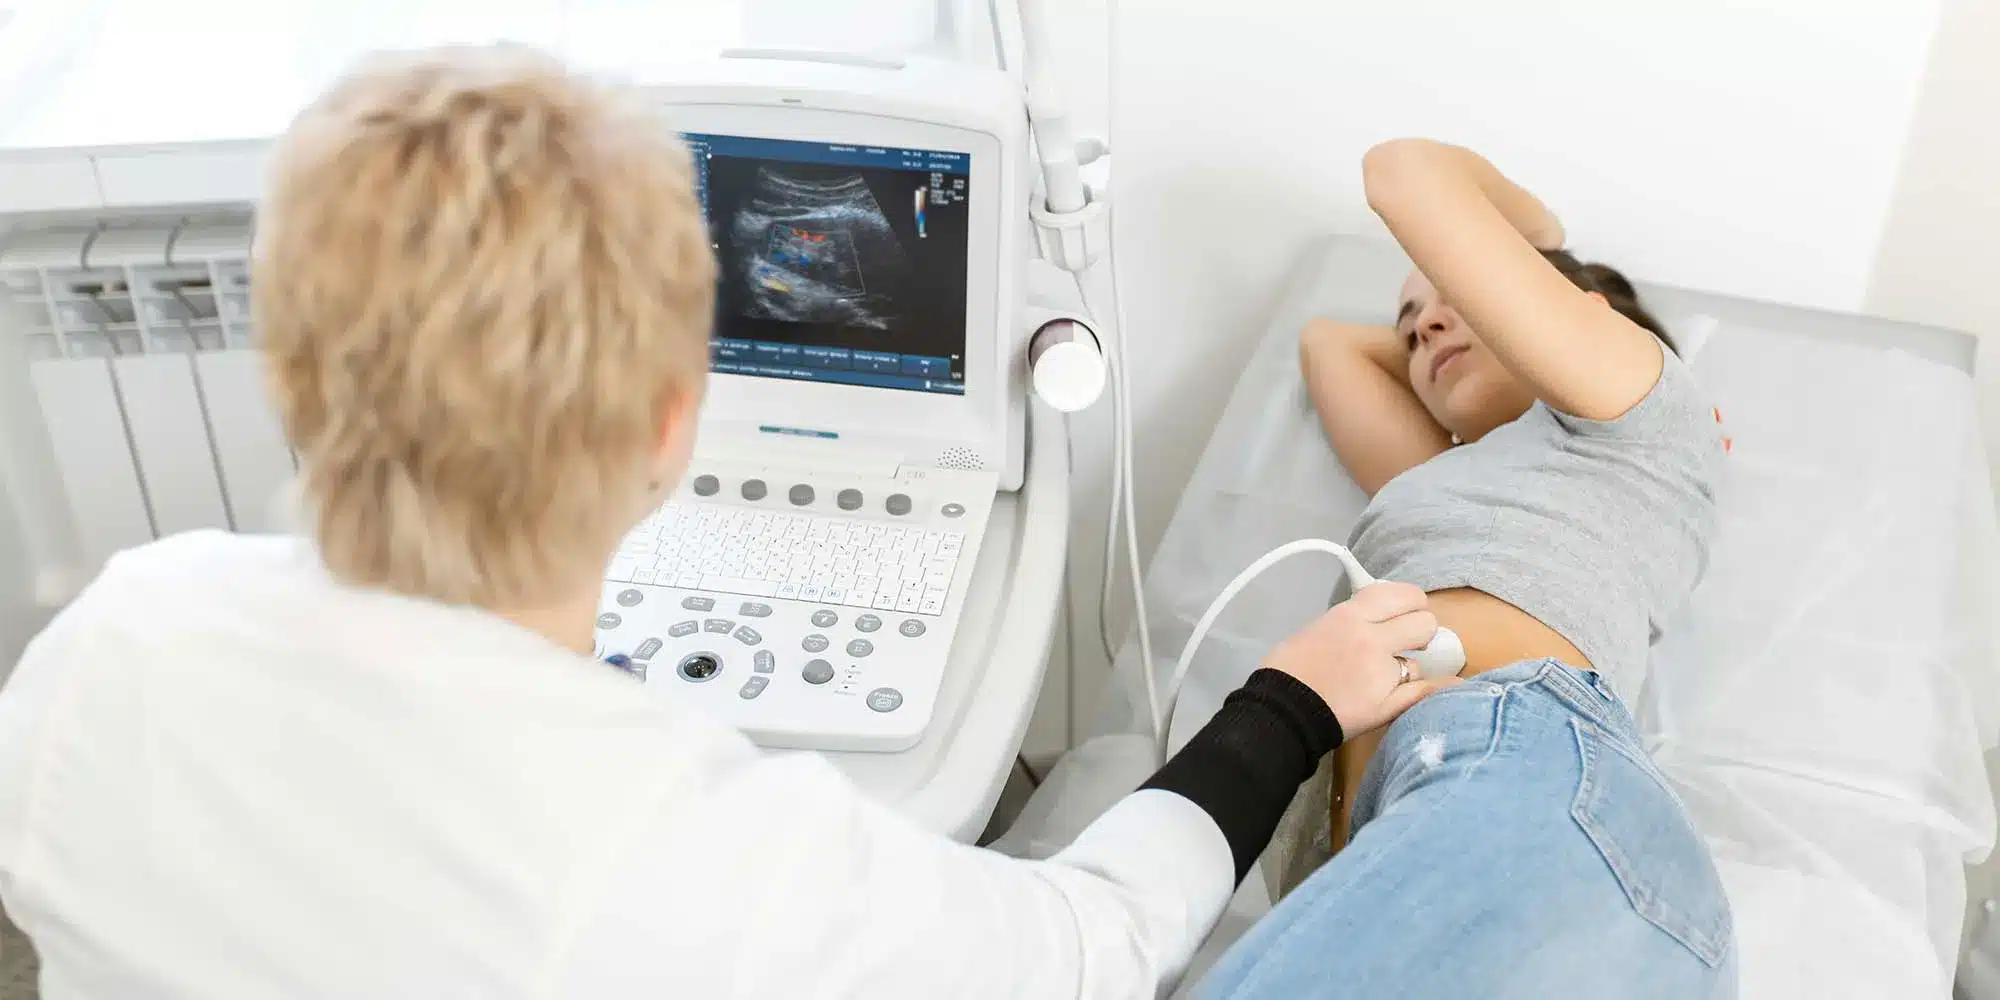 ultrasound scanning purpose, procedure and results